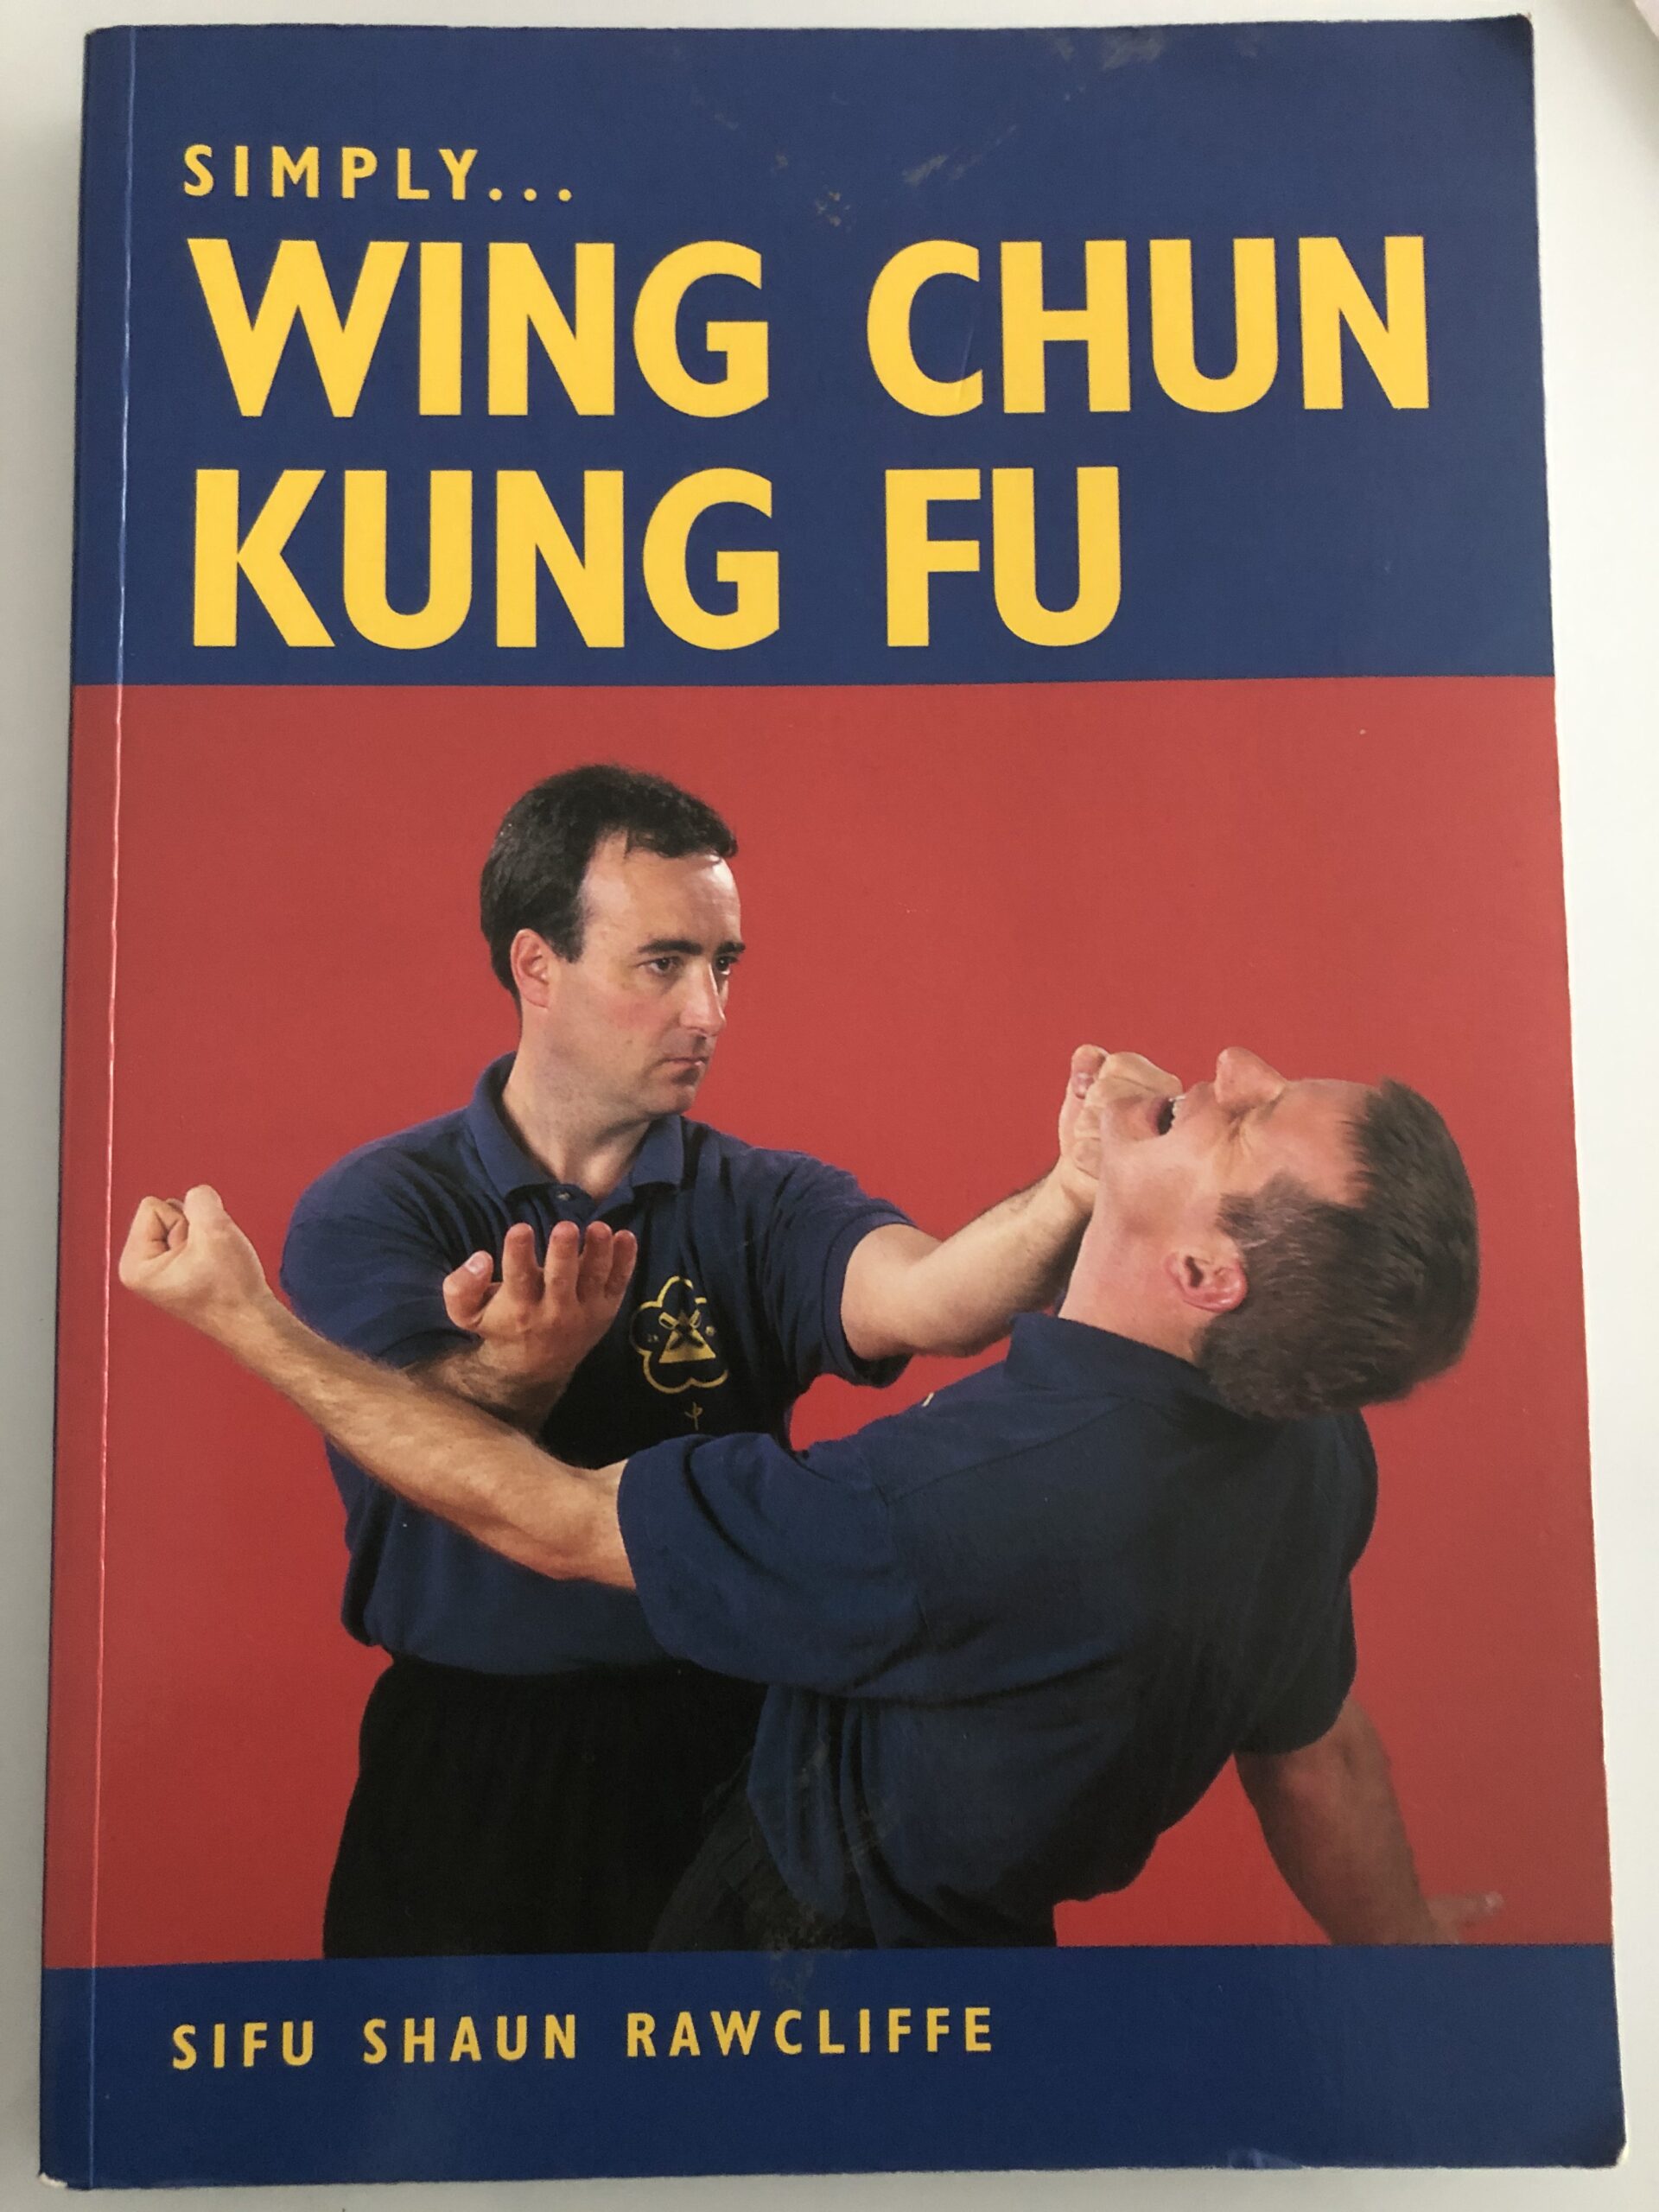 One Of The Best Martial Arts Training Books Martial Arts Books